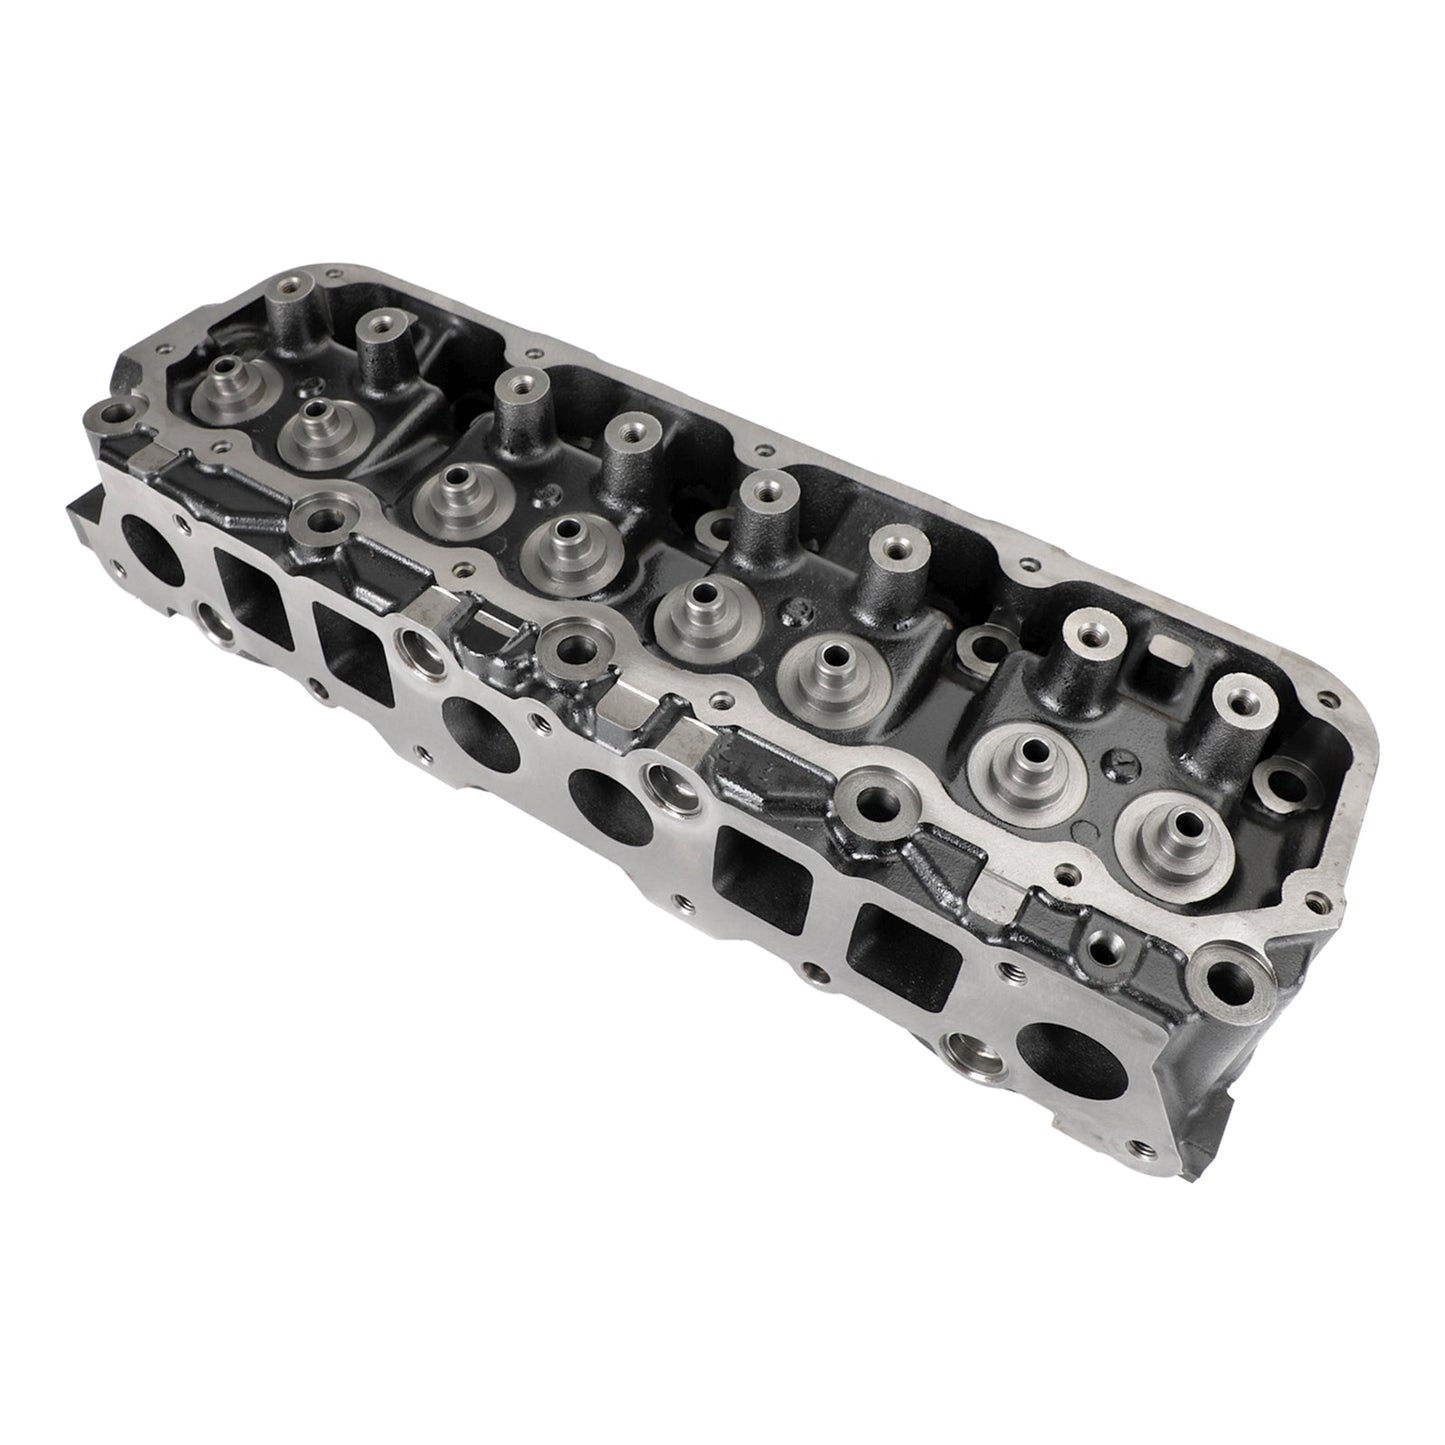 403 / 117 Bare Cylinder Head For Jeep 2.5L 1989-2002